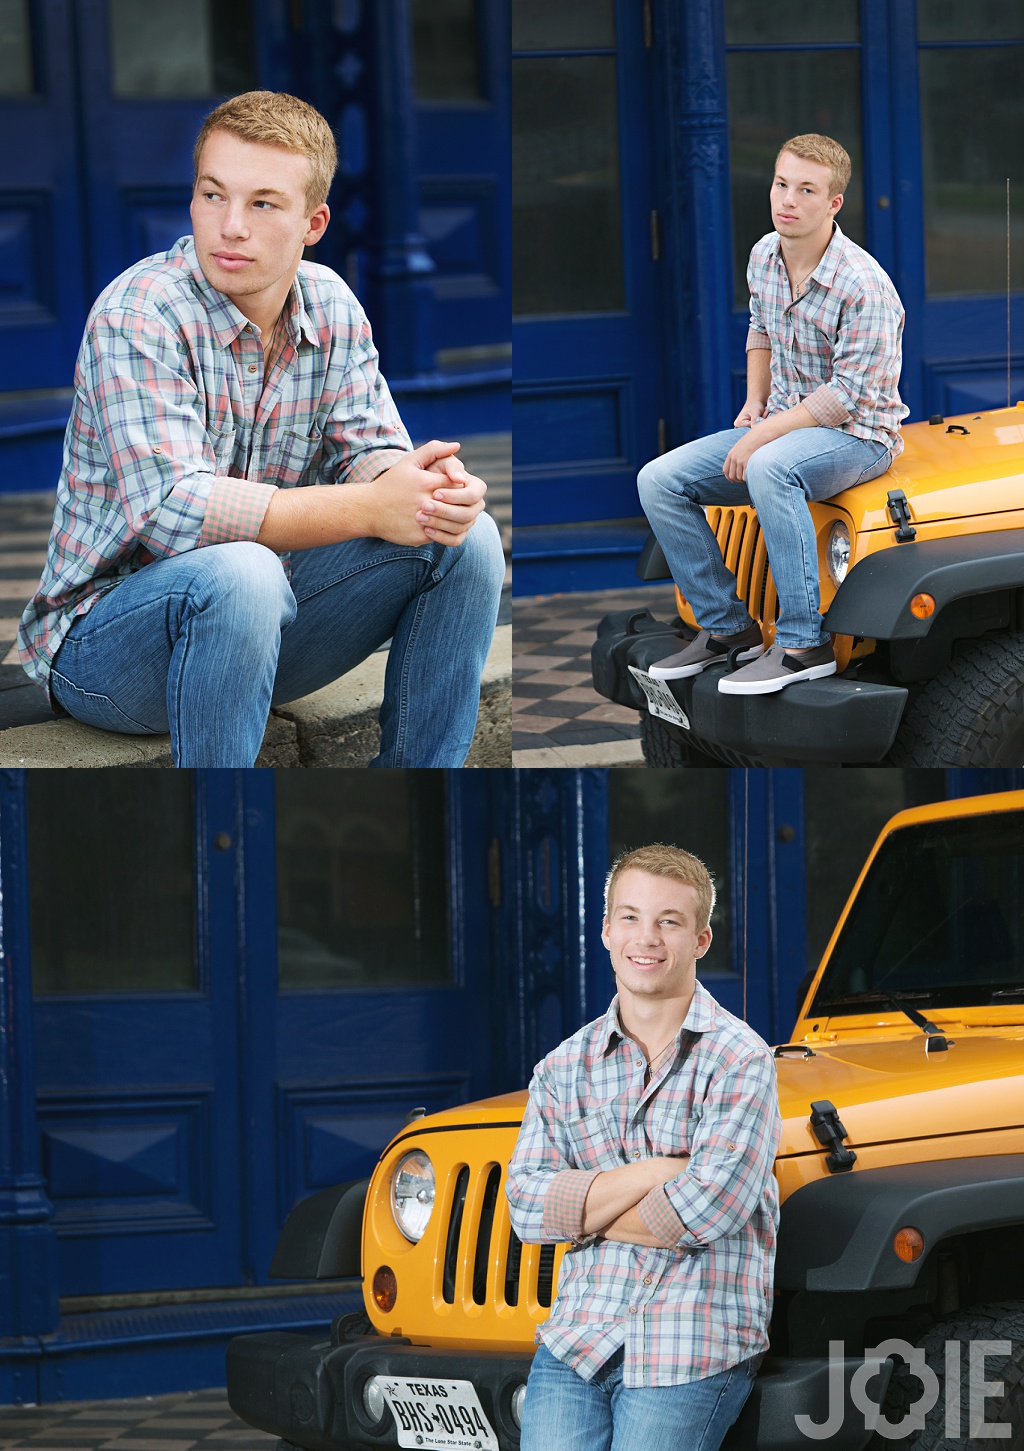 fort bend christian academy high school senior pictures jeep